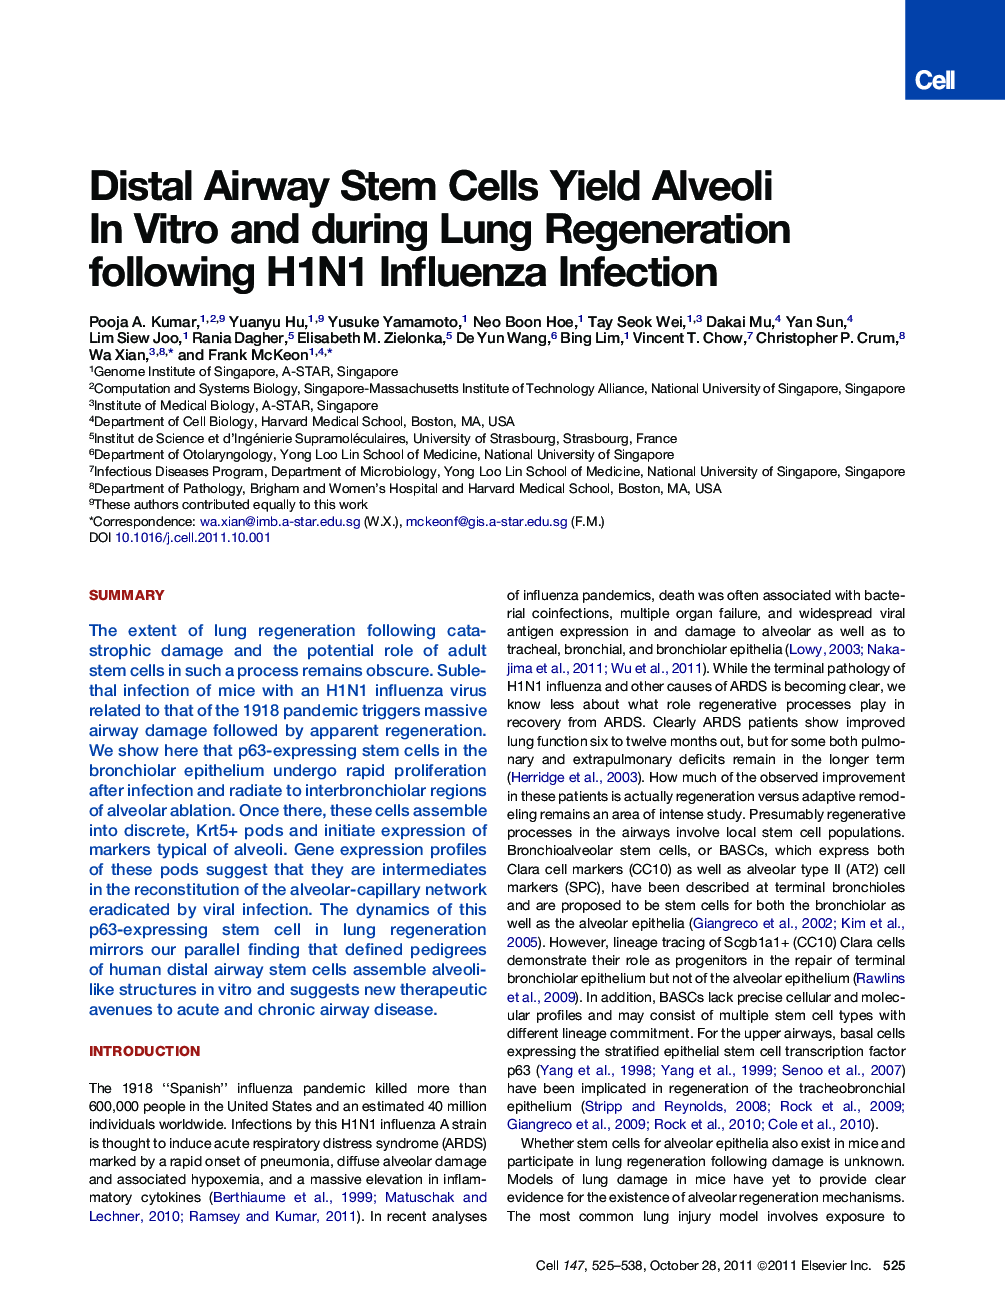 Distal Airway Stem Cells Yield Alveoli InÂ Vitro and during Lung Regeneration following H1N1 Influenza Infection